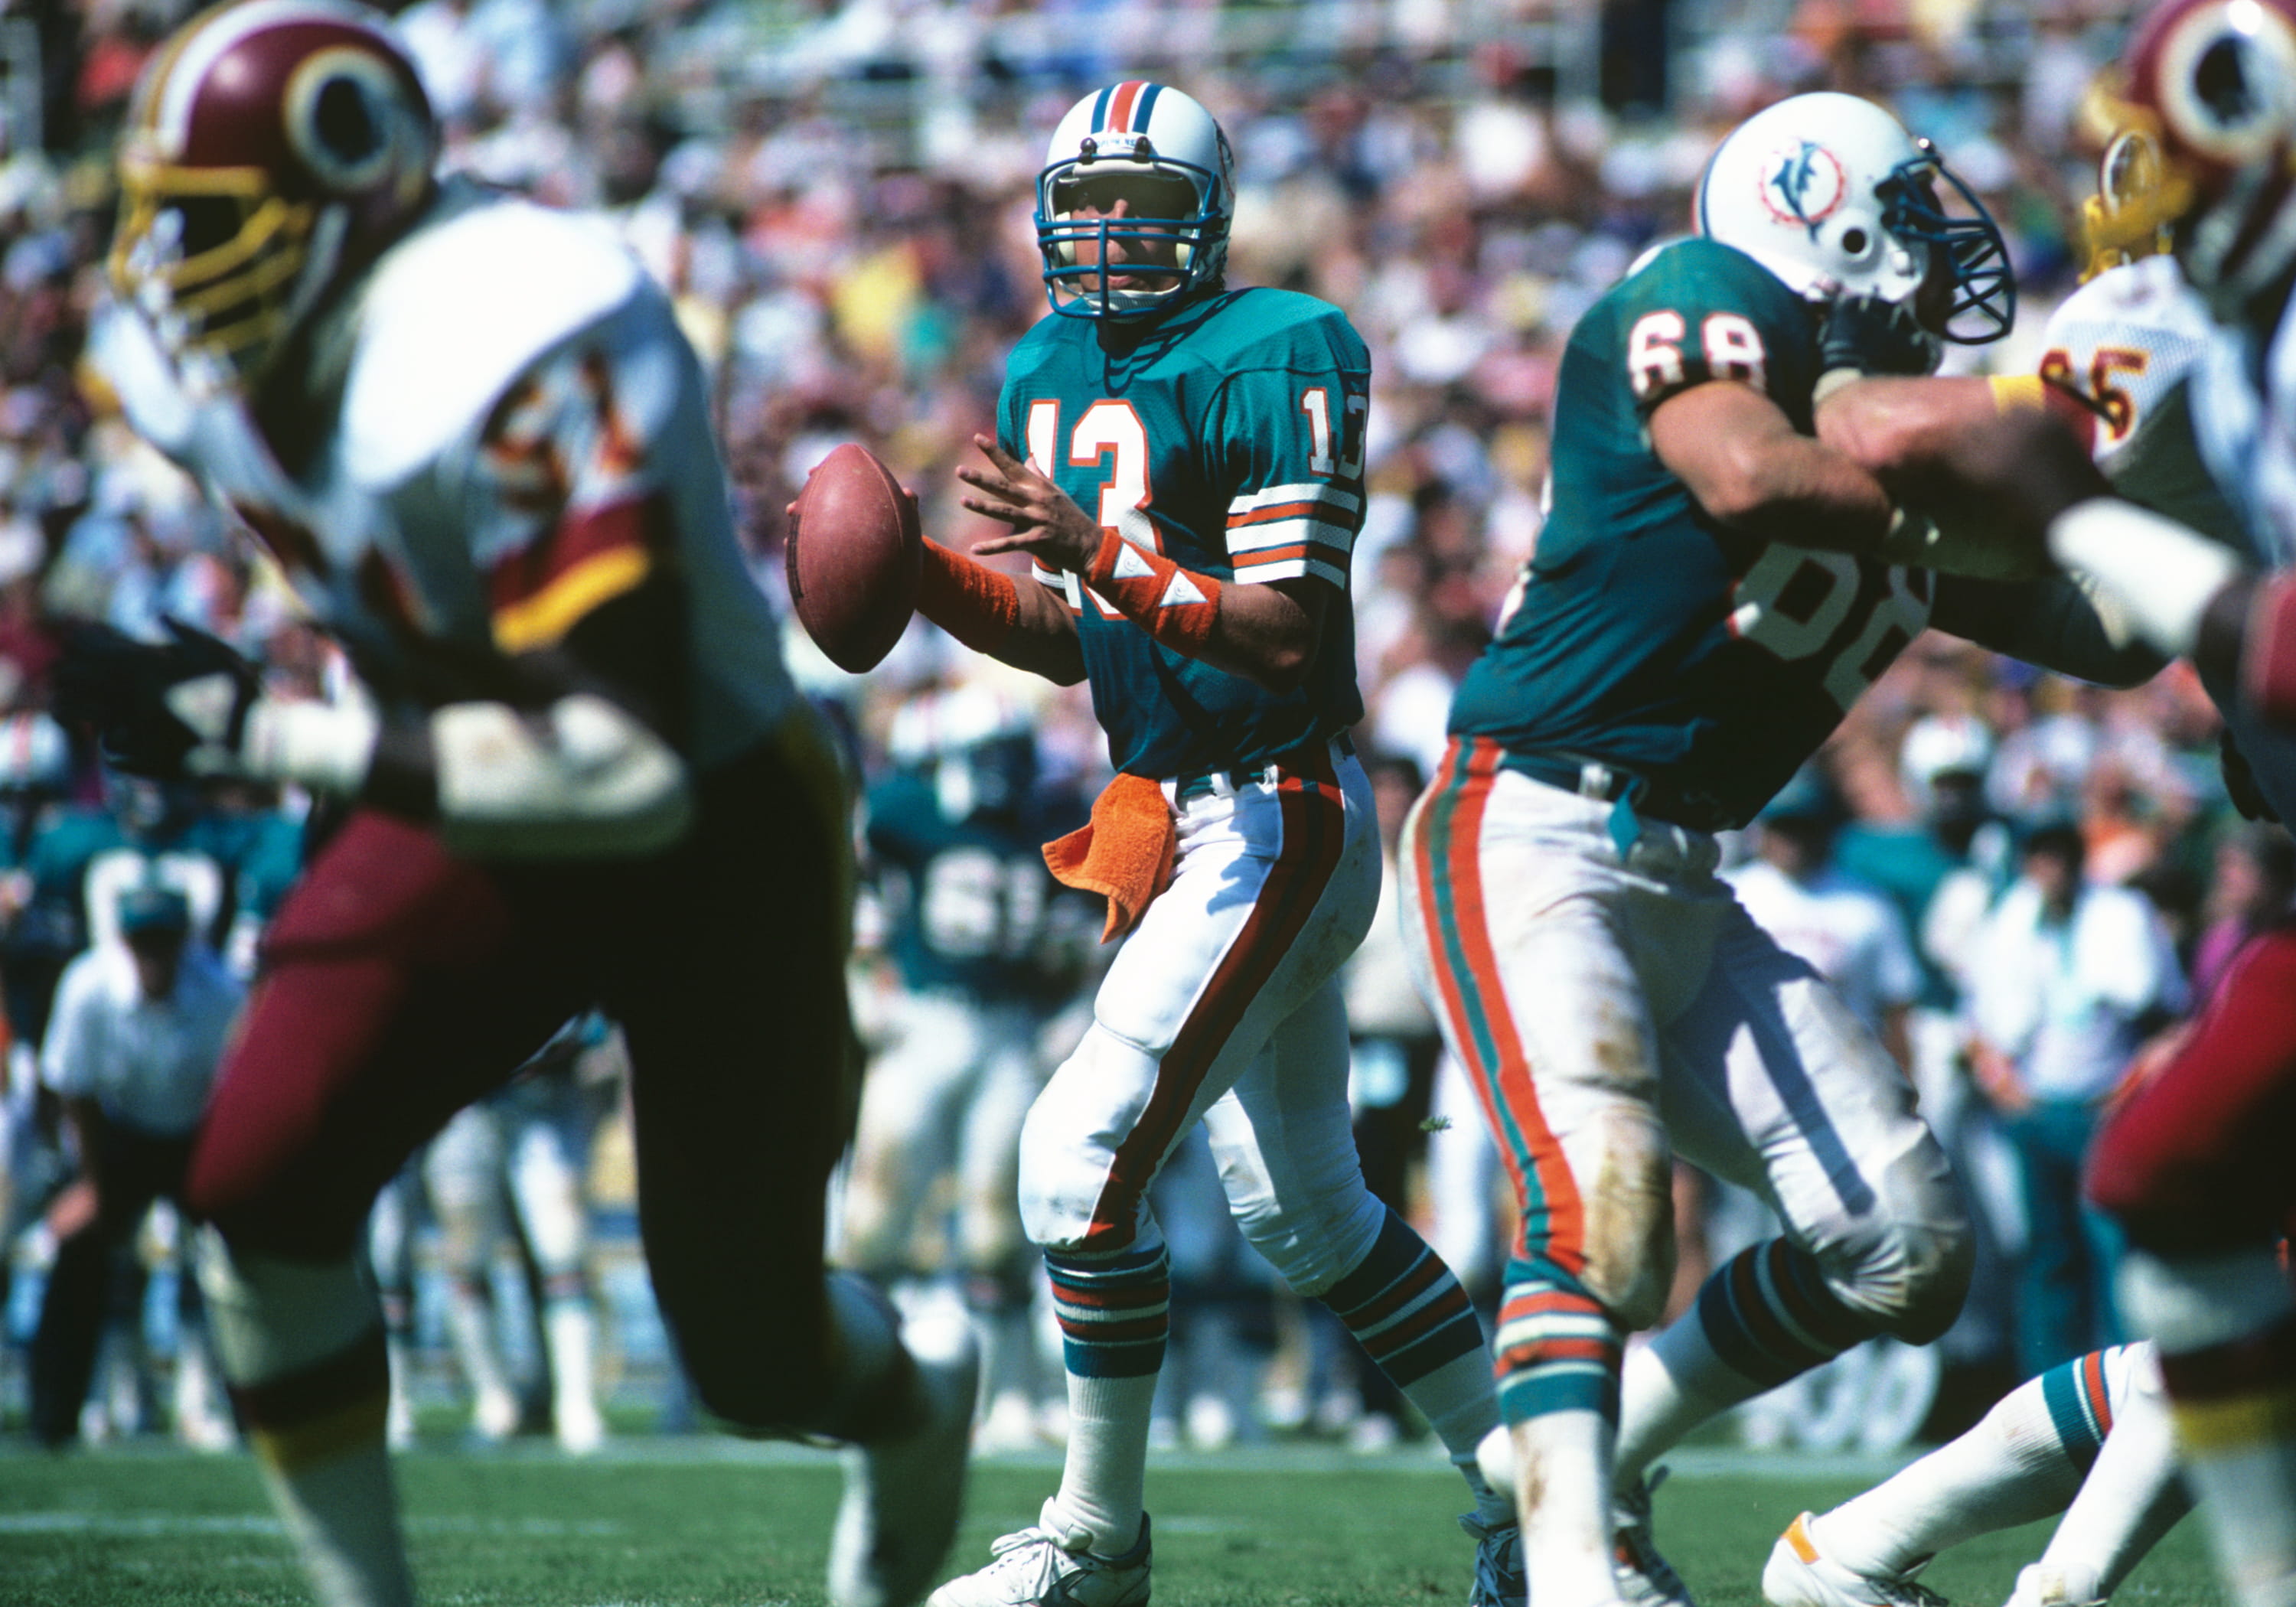 Miami Dolphins quarterback Dan Marino looks to pass during a game against the Washington Redskins in 1984.